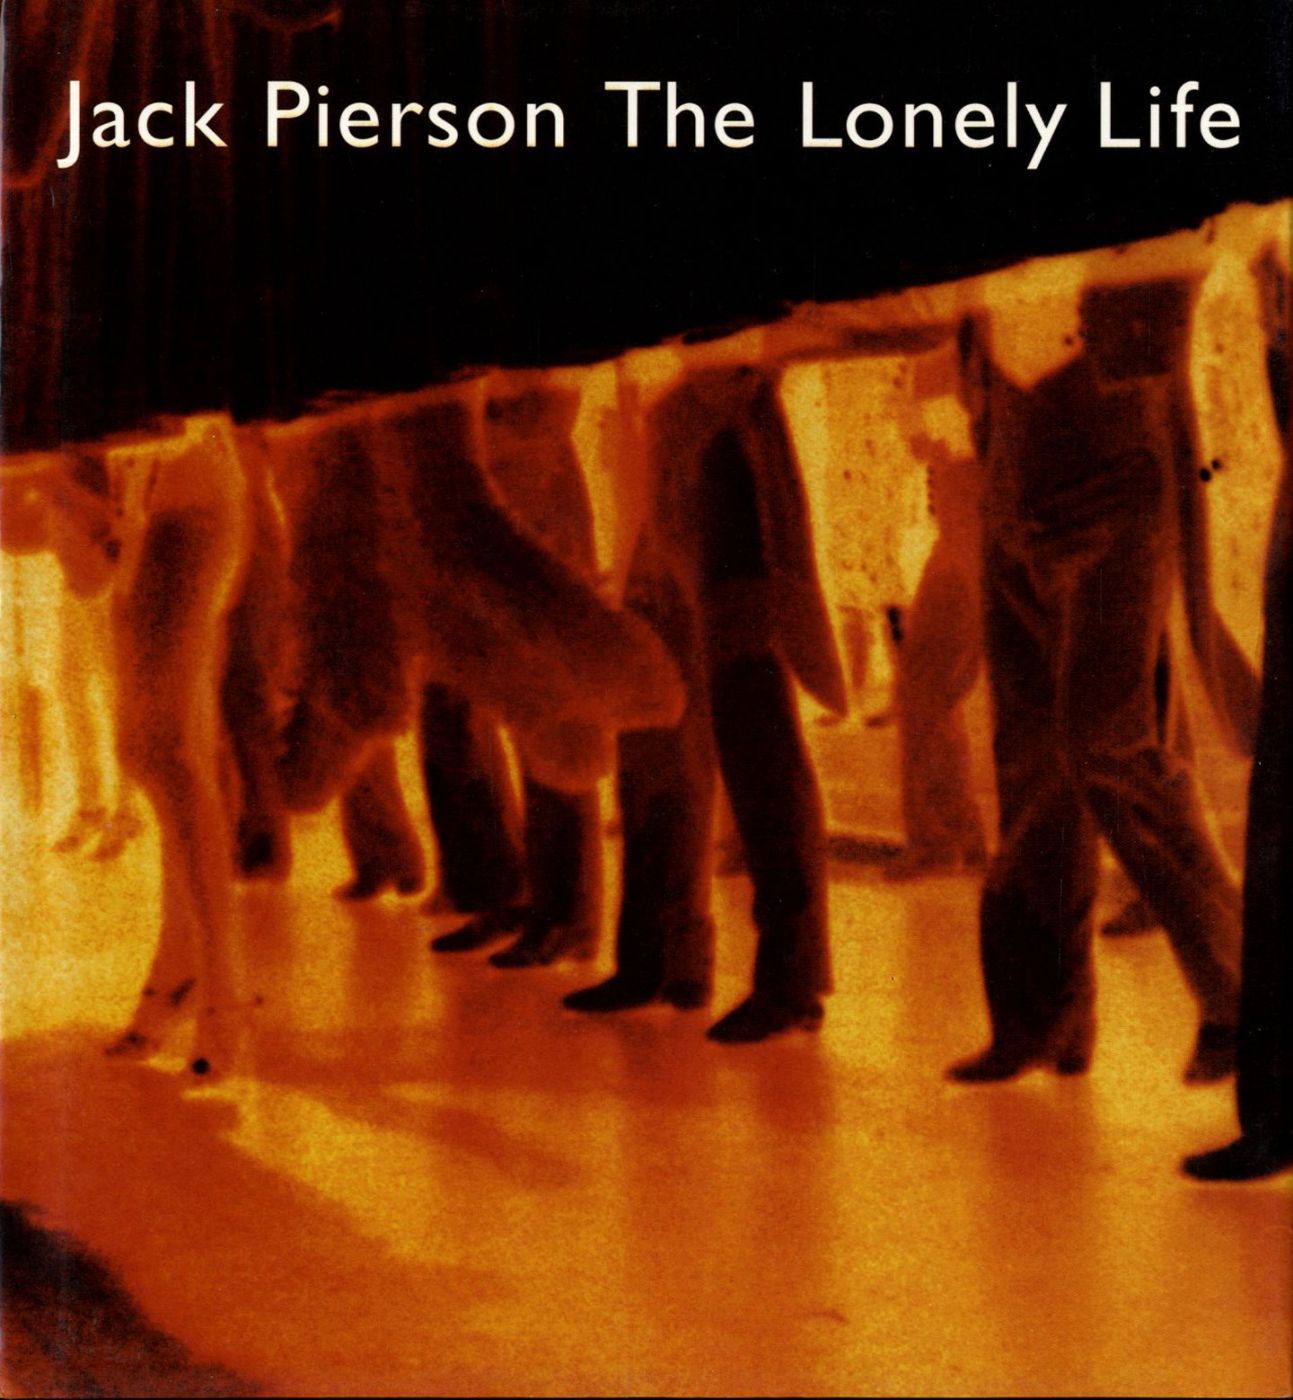 Jack Pierson: The Lonely Life